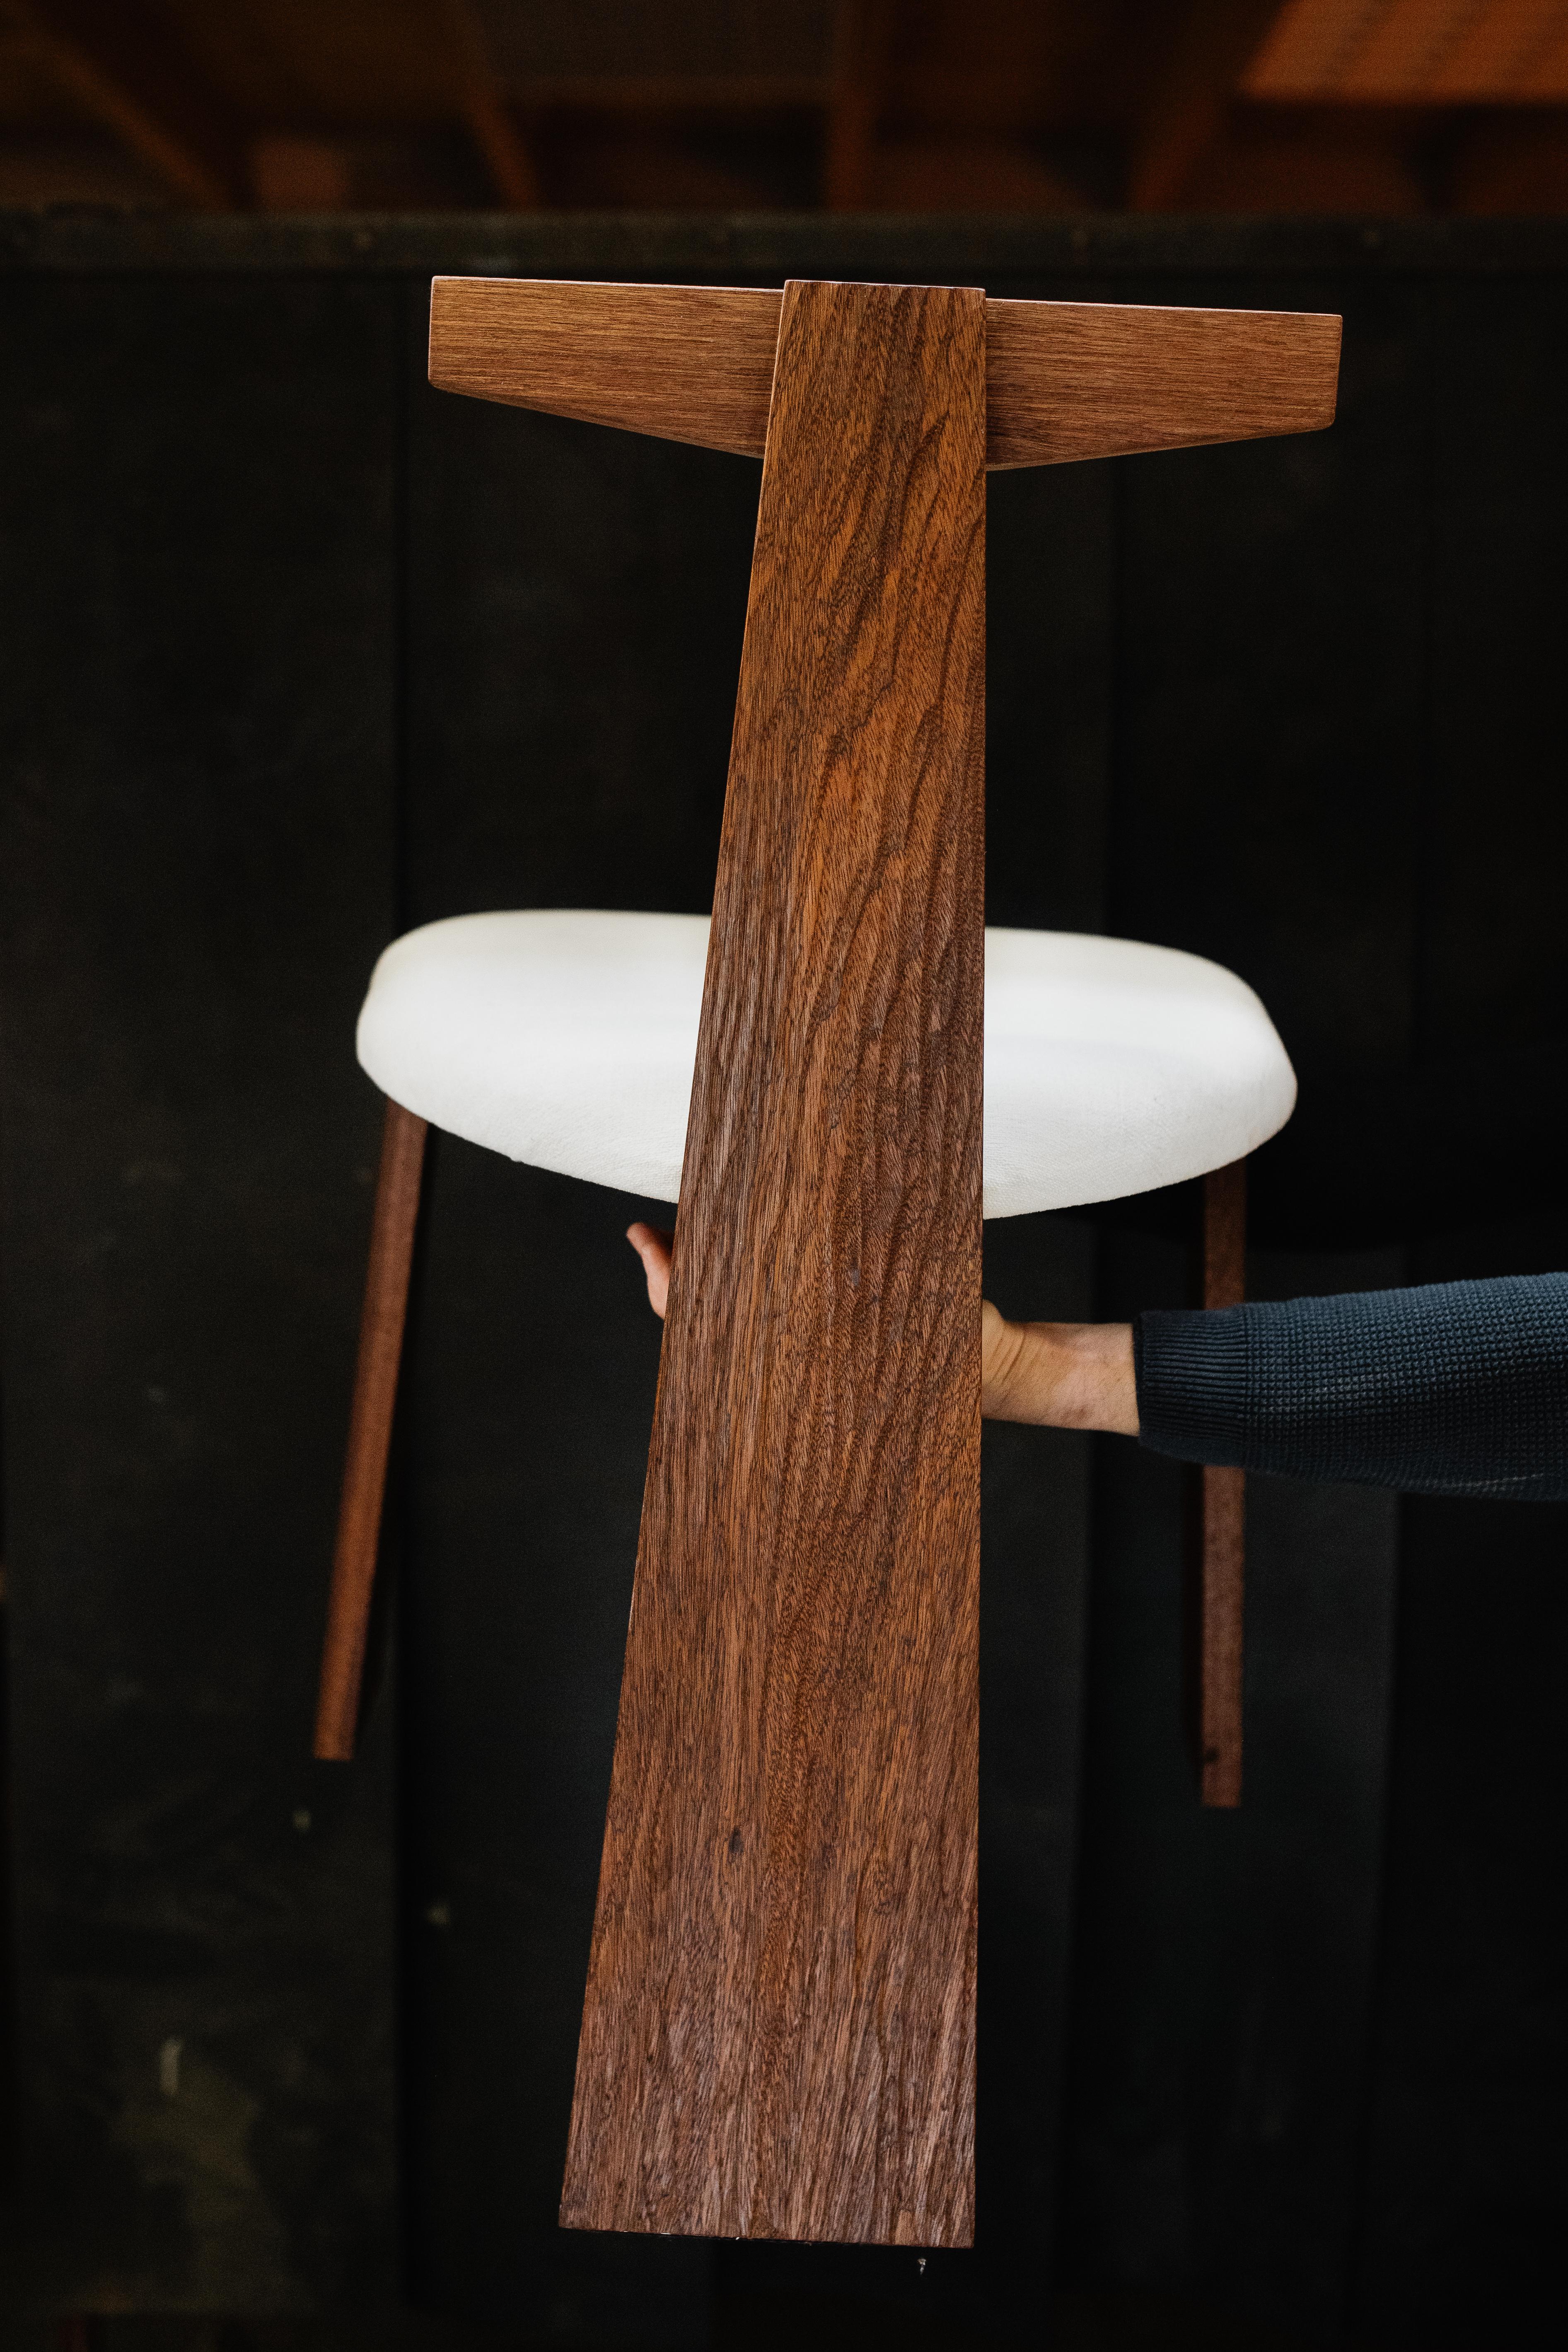 The Urithi Dining Chair is an original design, handmade with hardwood to be a functional art piece. The Chair was designed from the back, as this is the part you see mostly during the day. Inspired by nature, the back of the chair was designed to